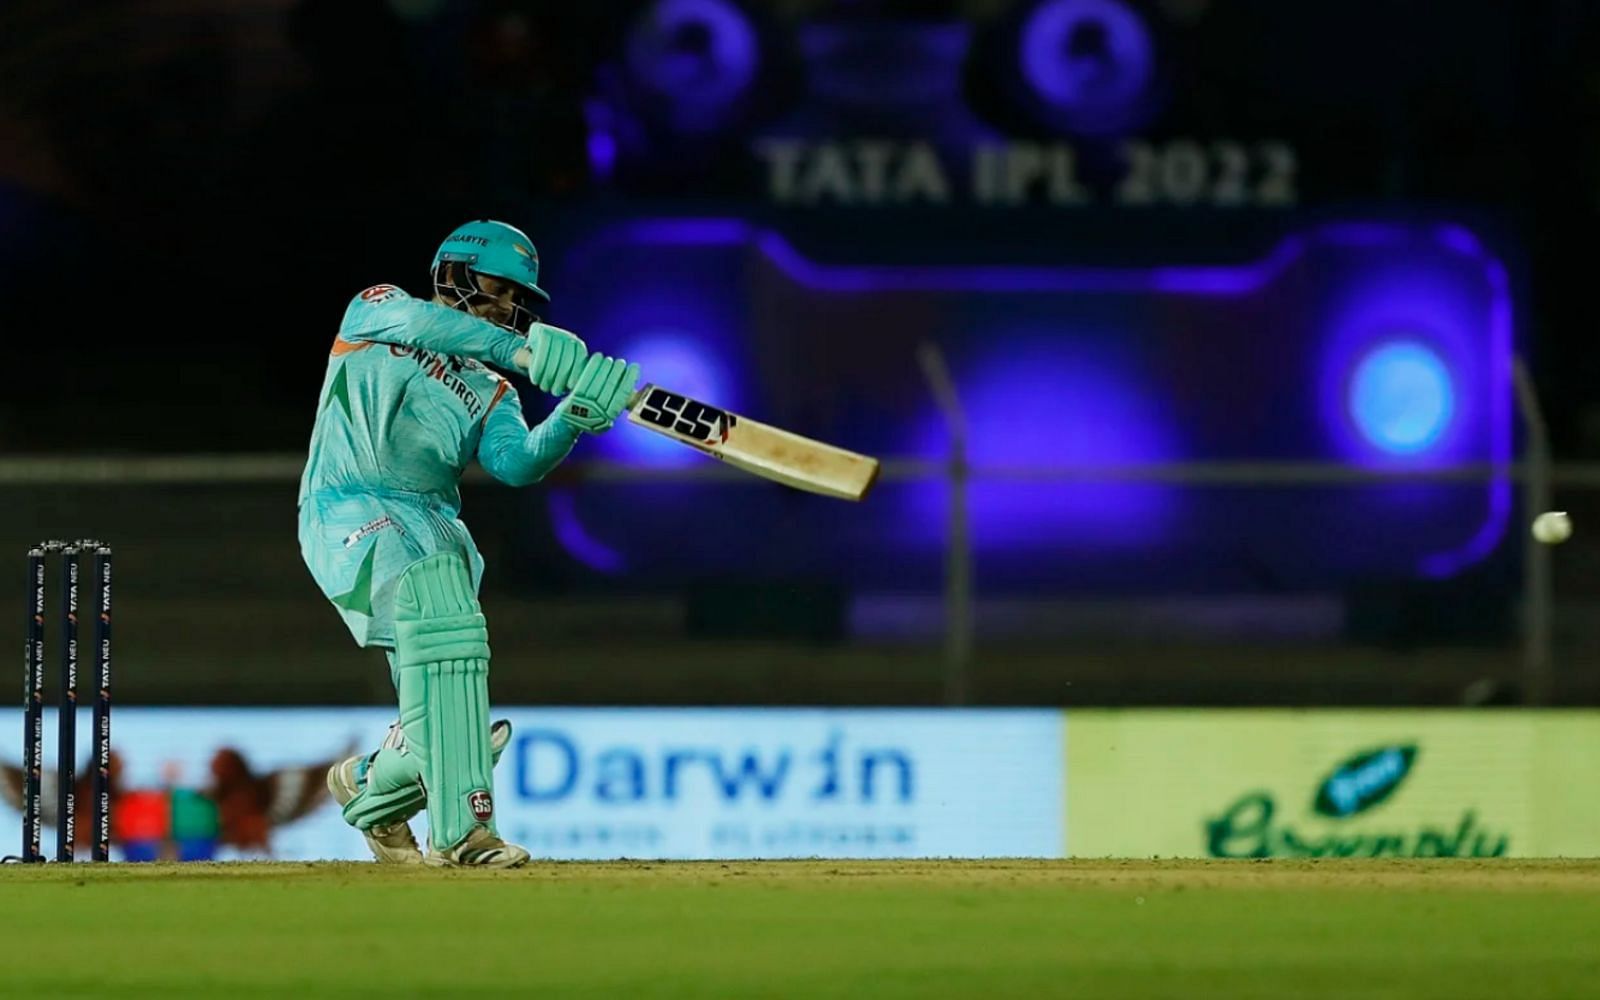 Quinton de Kock will be a key player for LSG on Friday (Image: BCCI/IPL)